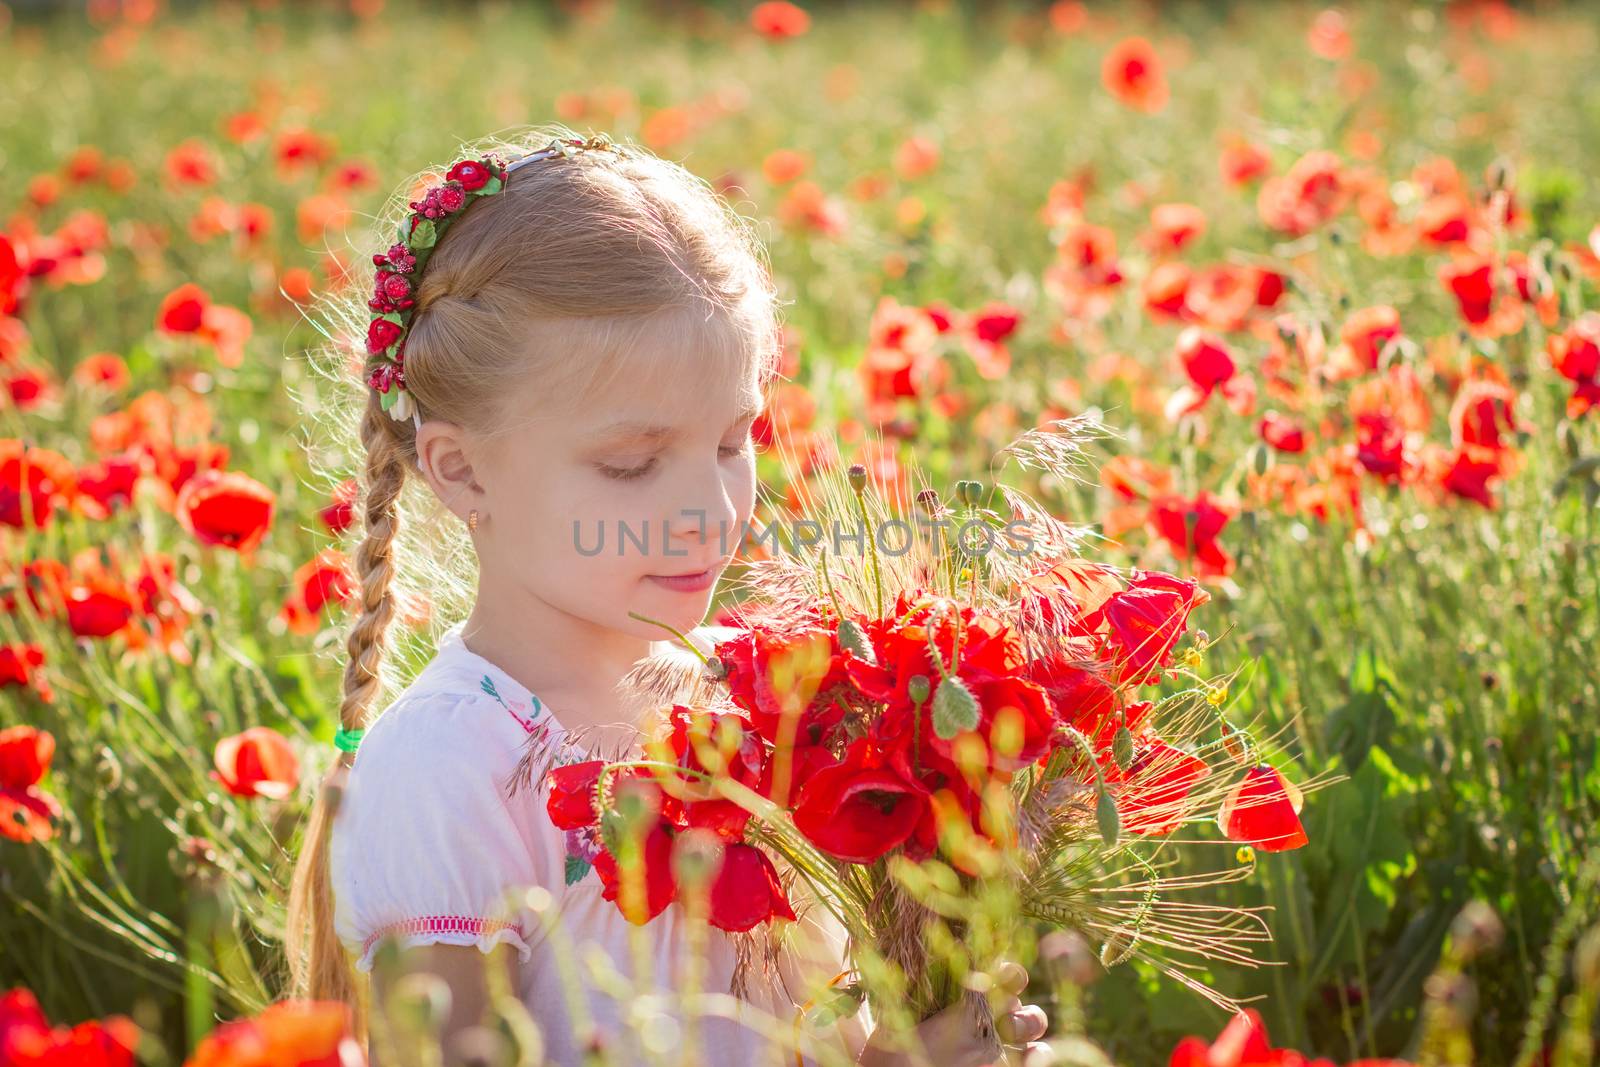 Young girl with bouquet among poppies field at sinset by Angel_a